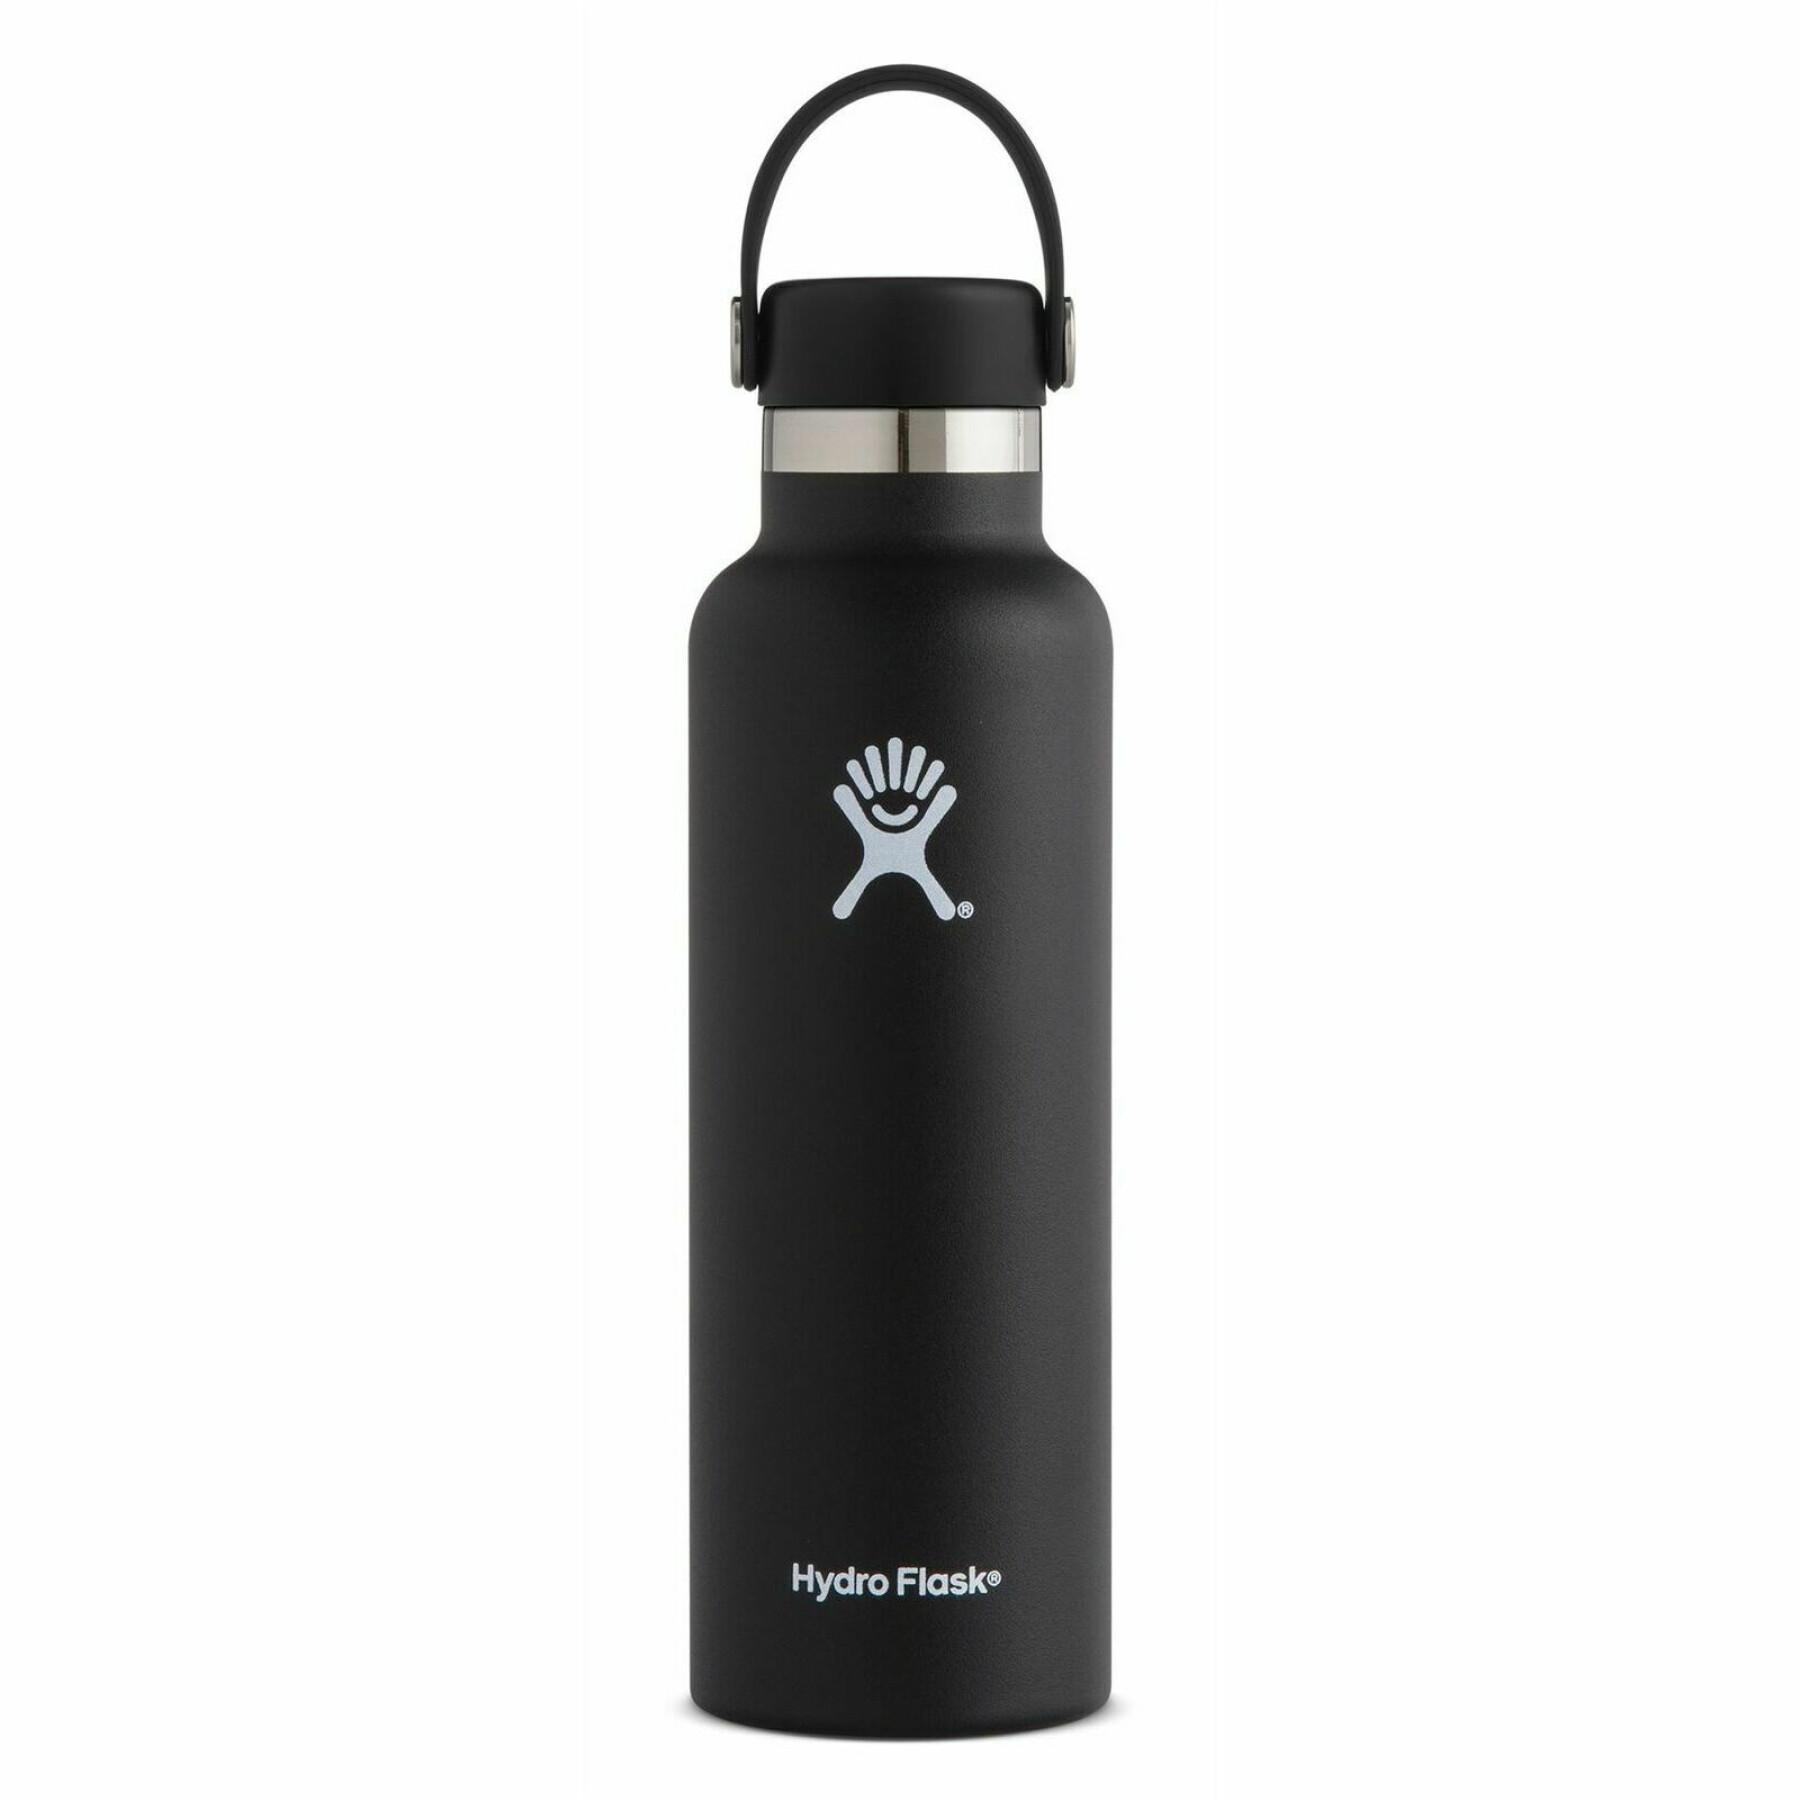 Standardowa butelka Hydro Flask mouth with stainless steel cap 21 oz